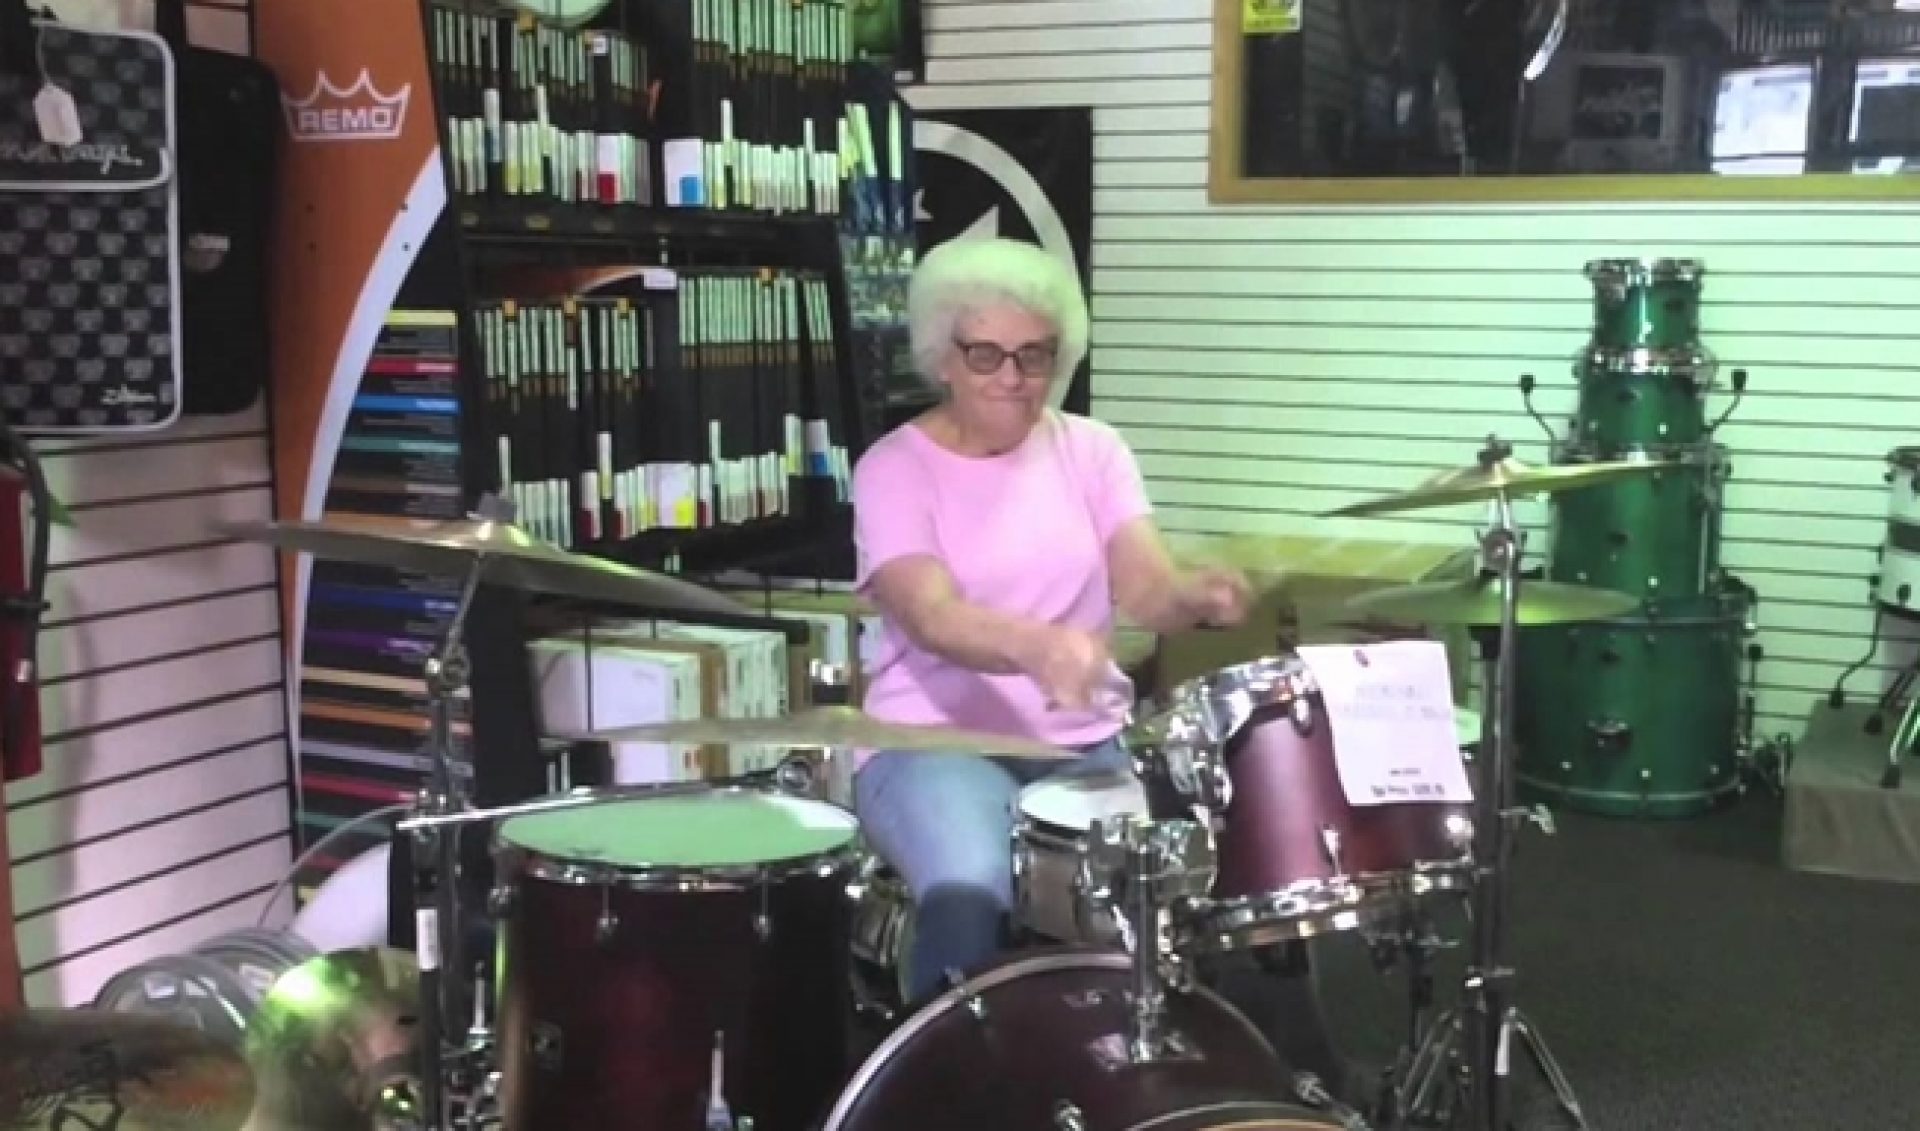 The Drumming Grandma Wins Jukin Video’s Video Of The Year Contest